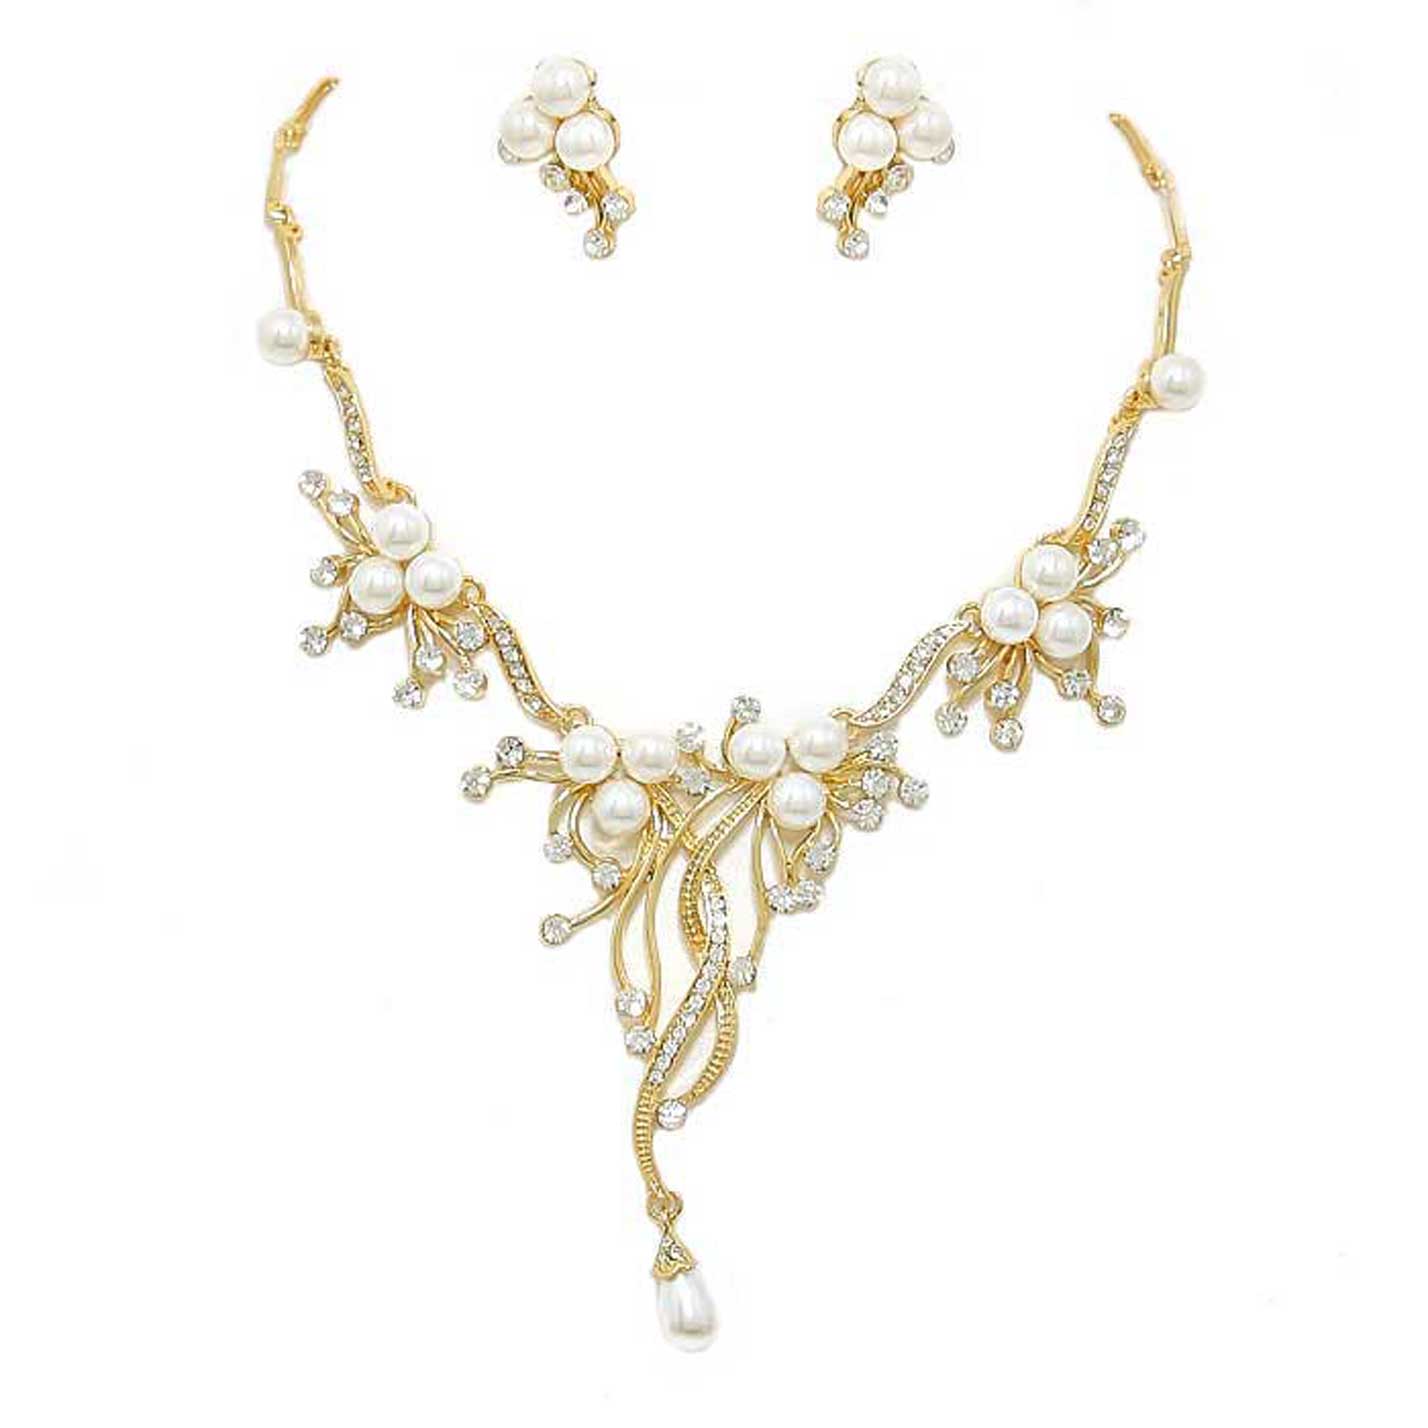 Silver Pearl Accented Floral Rhinestone Necklace. Get ready with these pearl necklace, put on a pop of shine to complete your ensemble. Perfect for adding just the right amount of shimmer and a touch of class to special events. These classy necklaces are perfect for Party, Wedding and Evening. Awesome gift for birthday, Anniversary, Valentine’s Day or any special occasion.